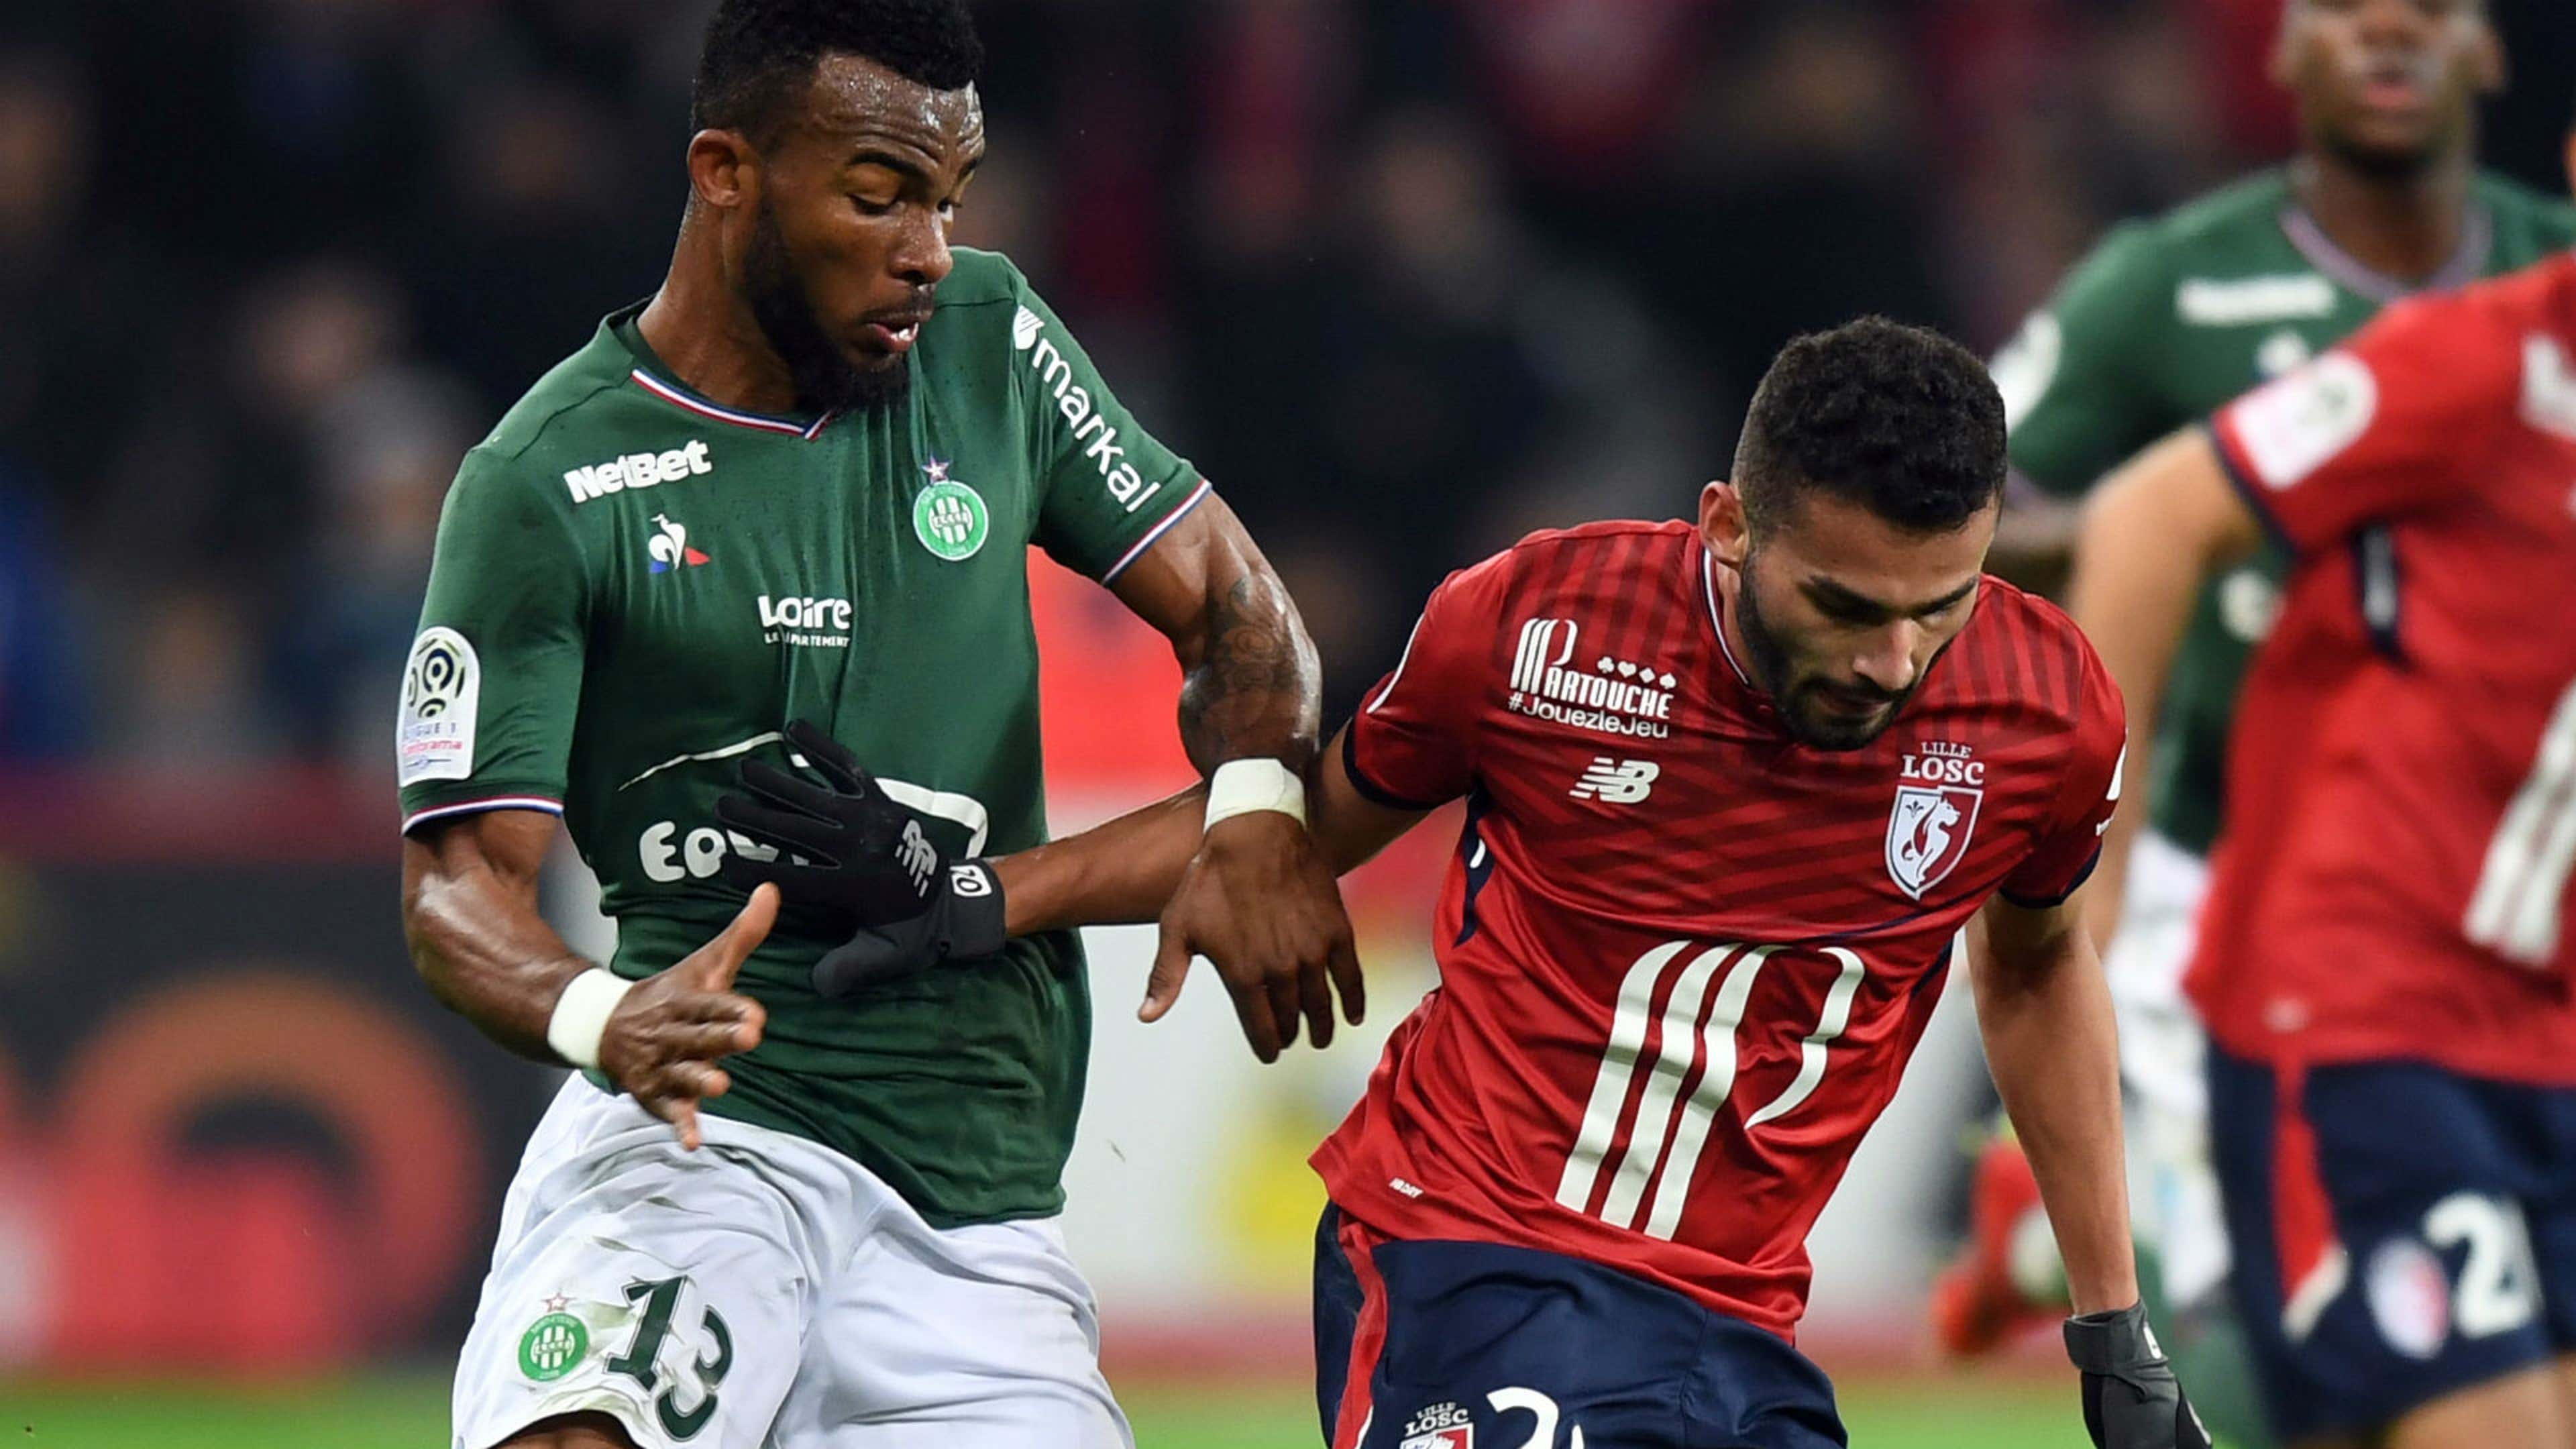 Betting Tips for Today: Saint-Etienne to continue impressive home form